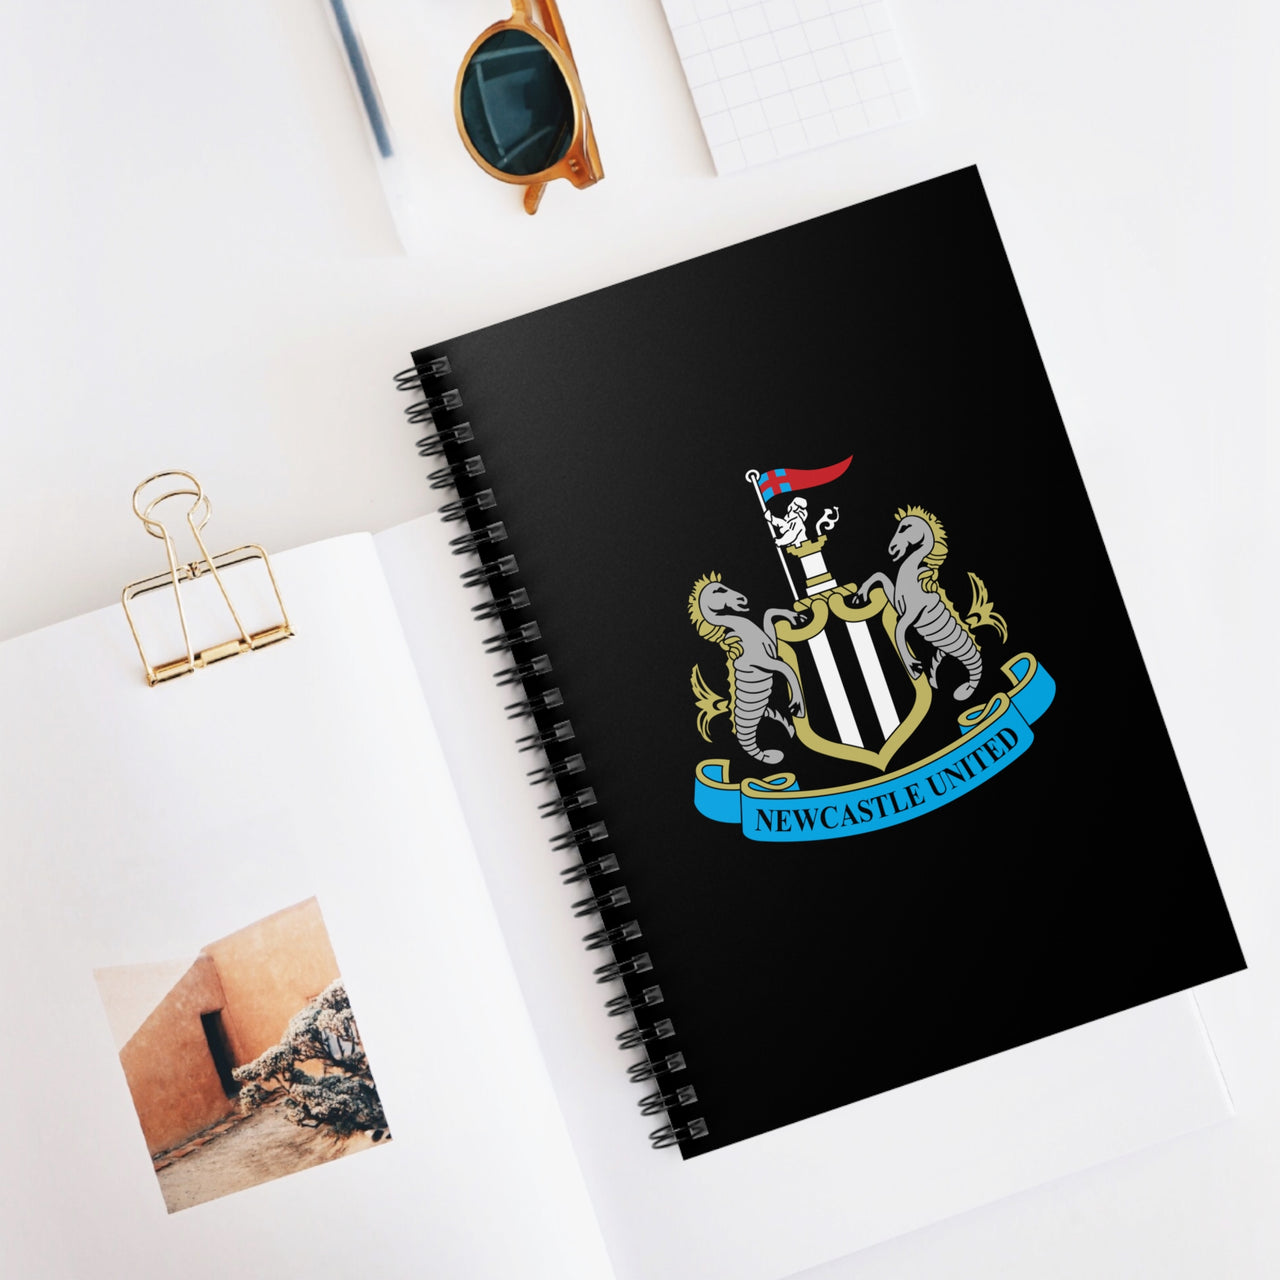 Newcastle United Spiral Notebook - Ruled Line